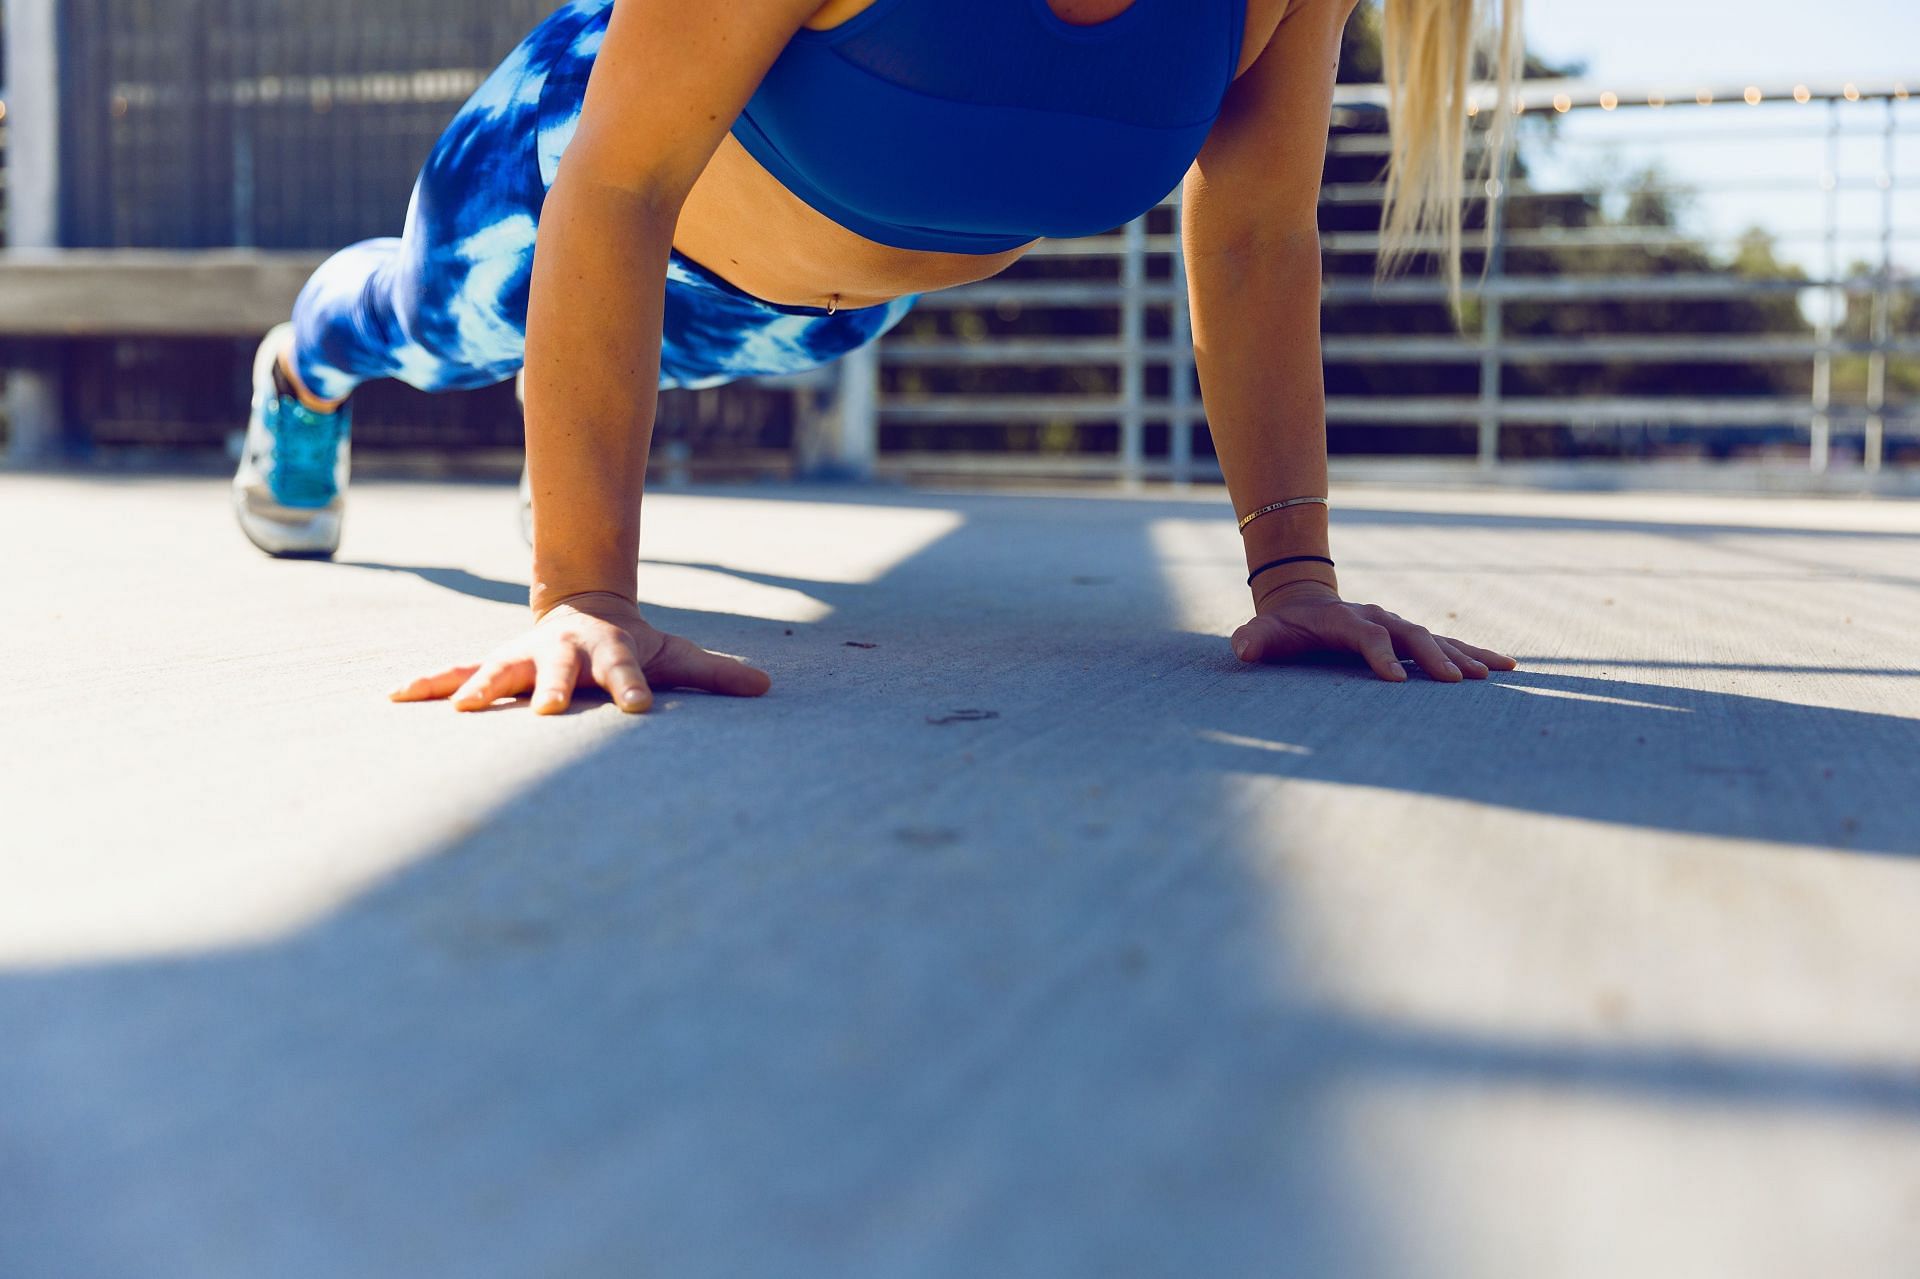 Side plank exercise helps in strengthening your core. (Image via Unsplash / Ayo Ogunseinde)